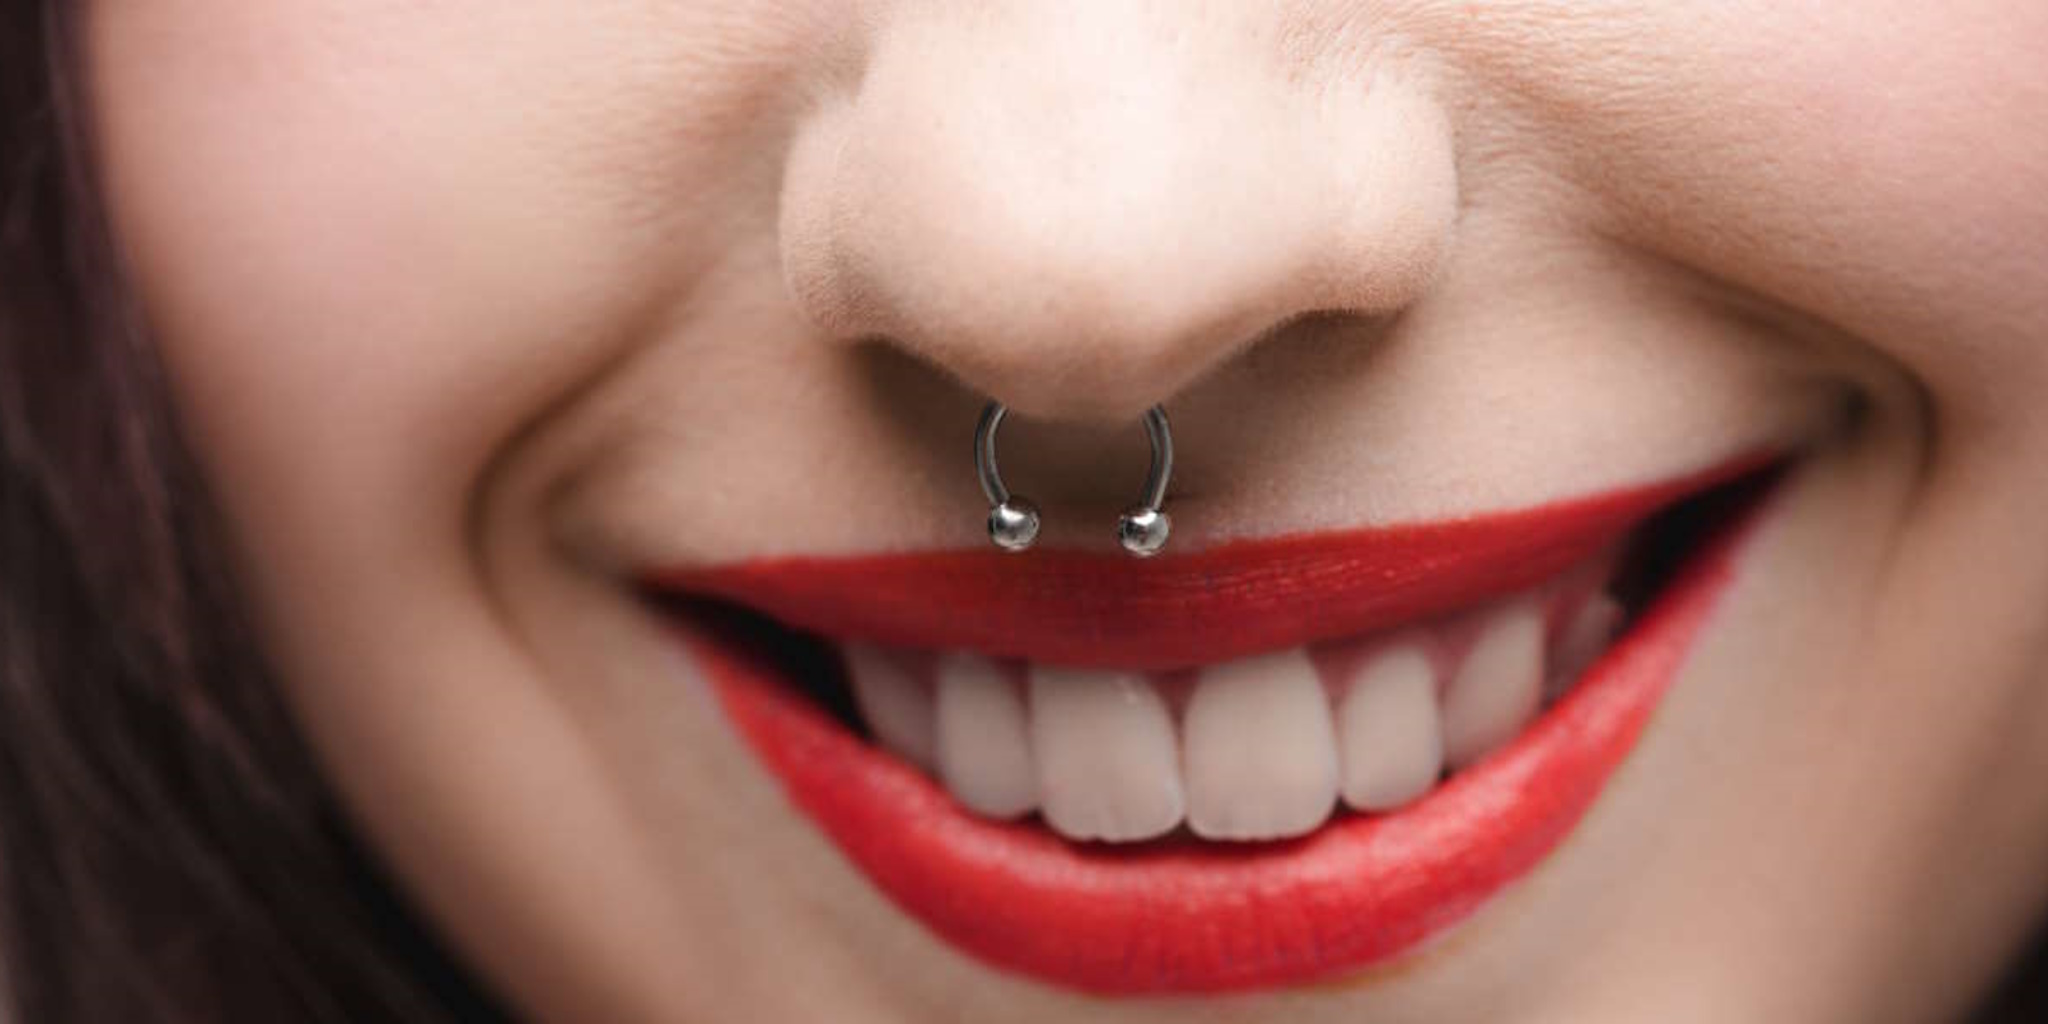 A septum piercing on a female with red lipstick.